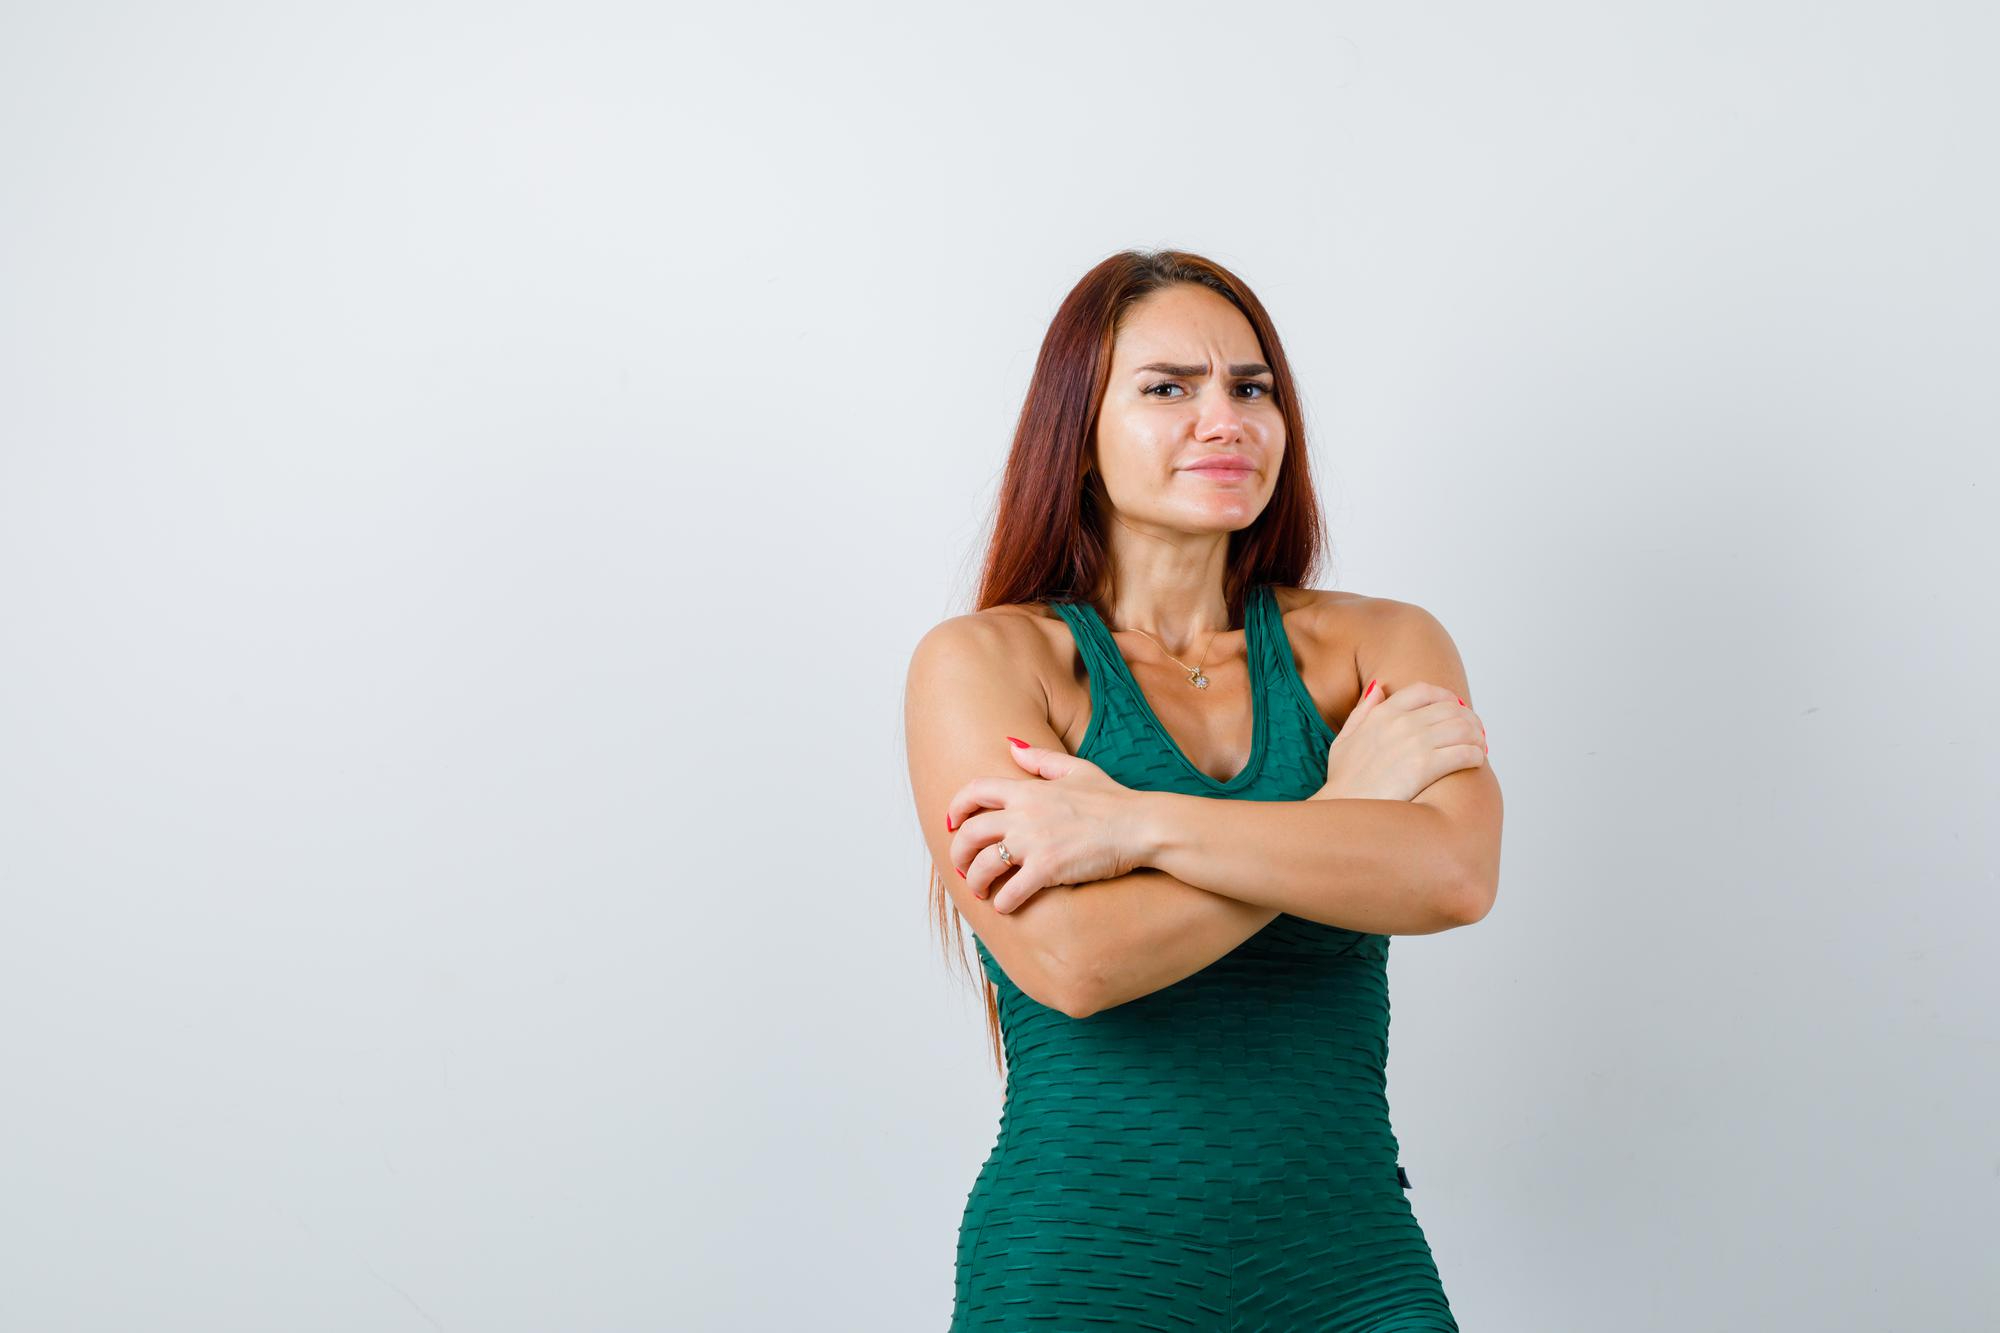 A woman with an attitude with her arms folded across her chest | Source: Freepik